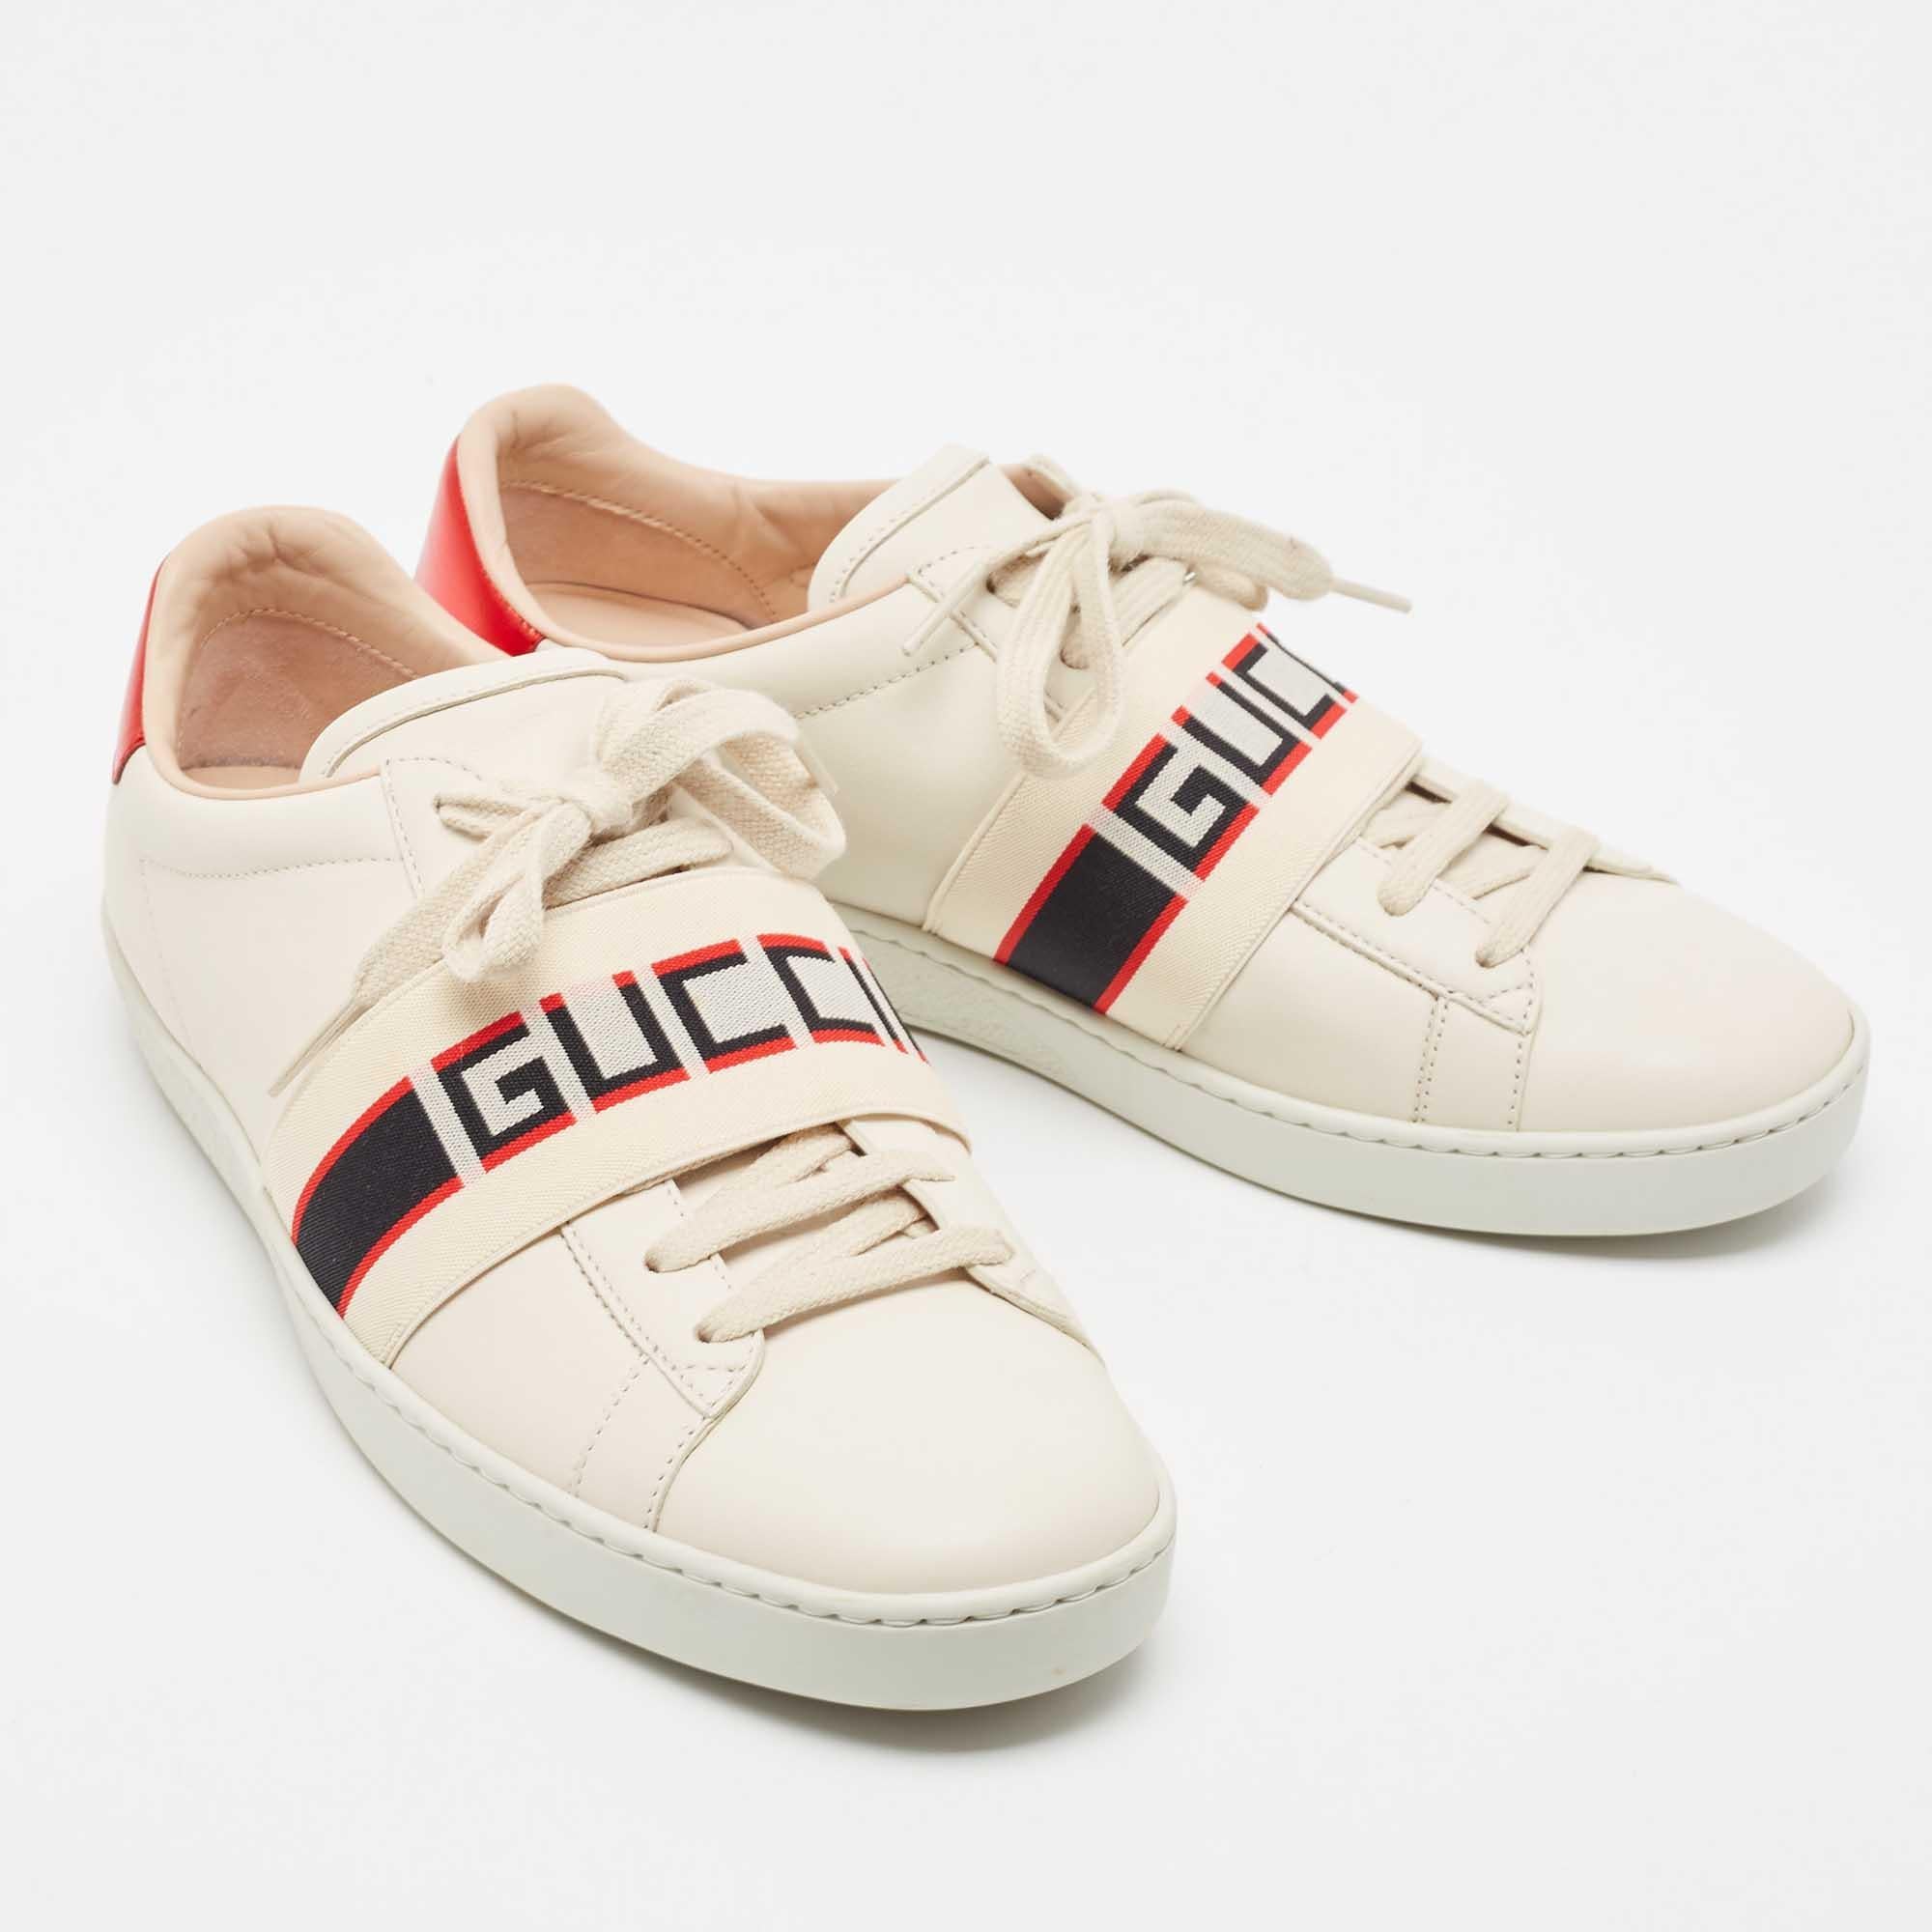 Gucci Cream Leather Logo Elastic Band Ace Sneakers Size 39 For Sale 4